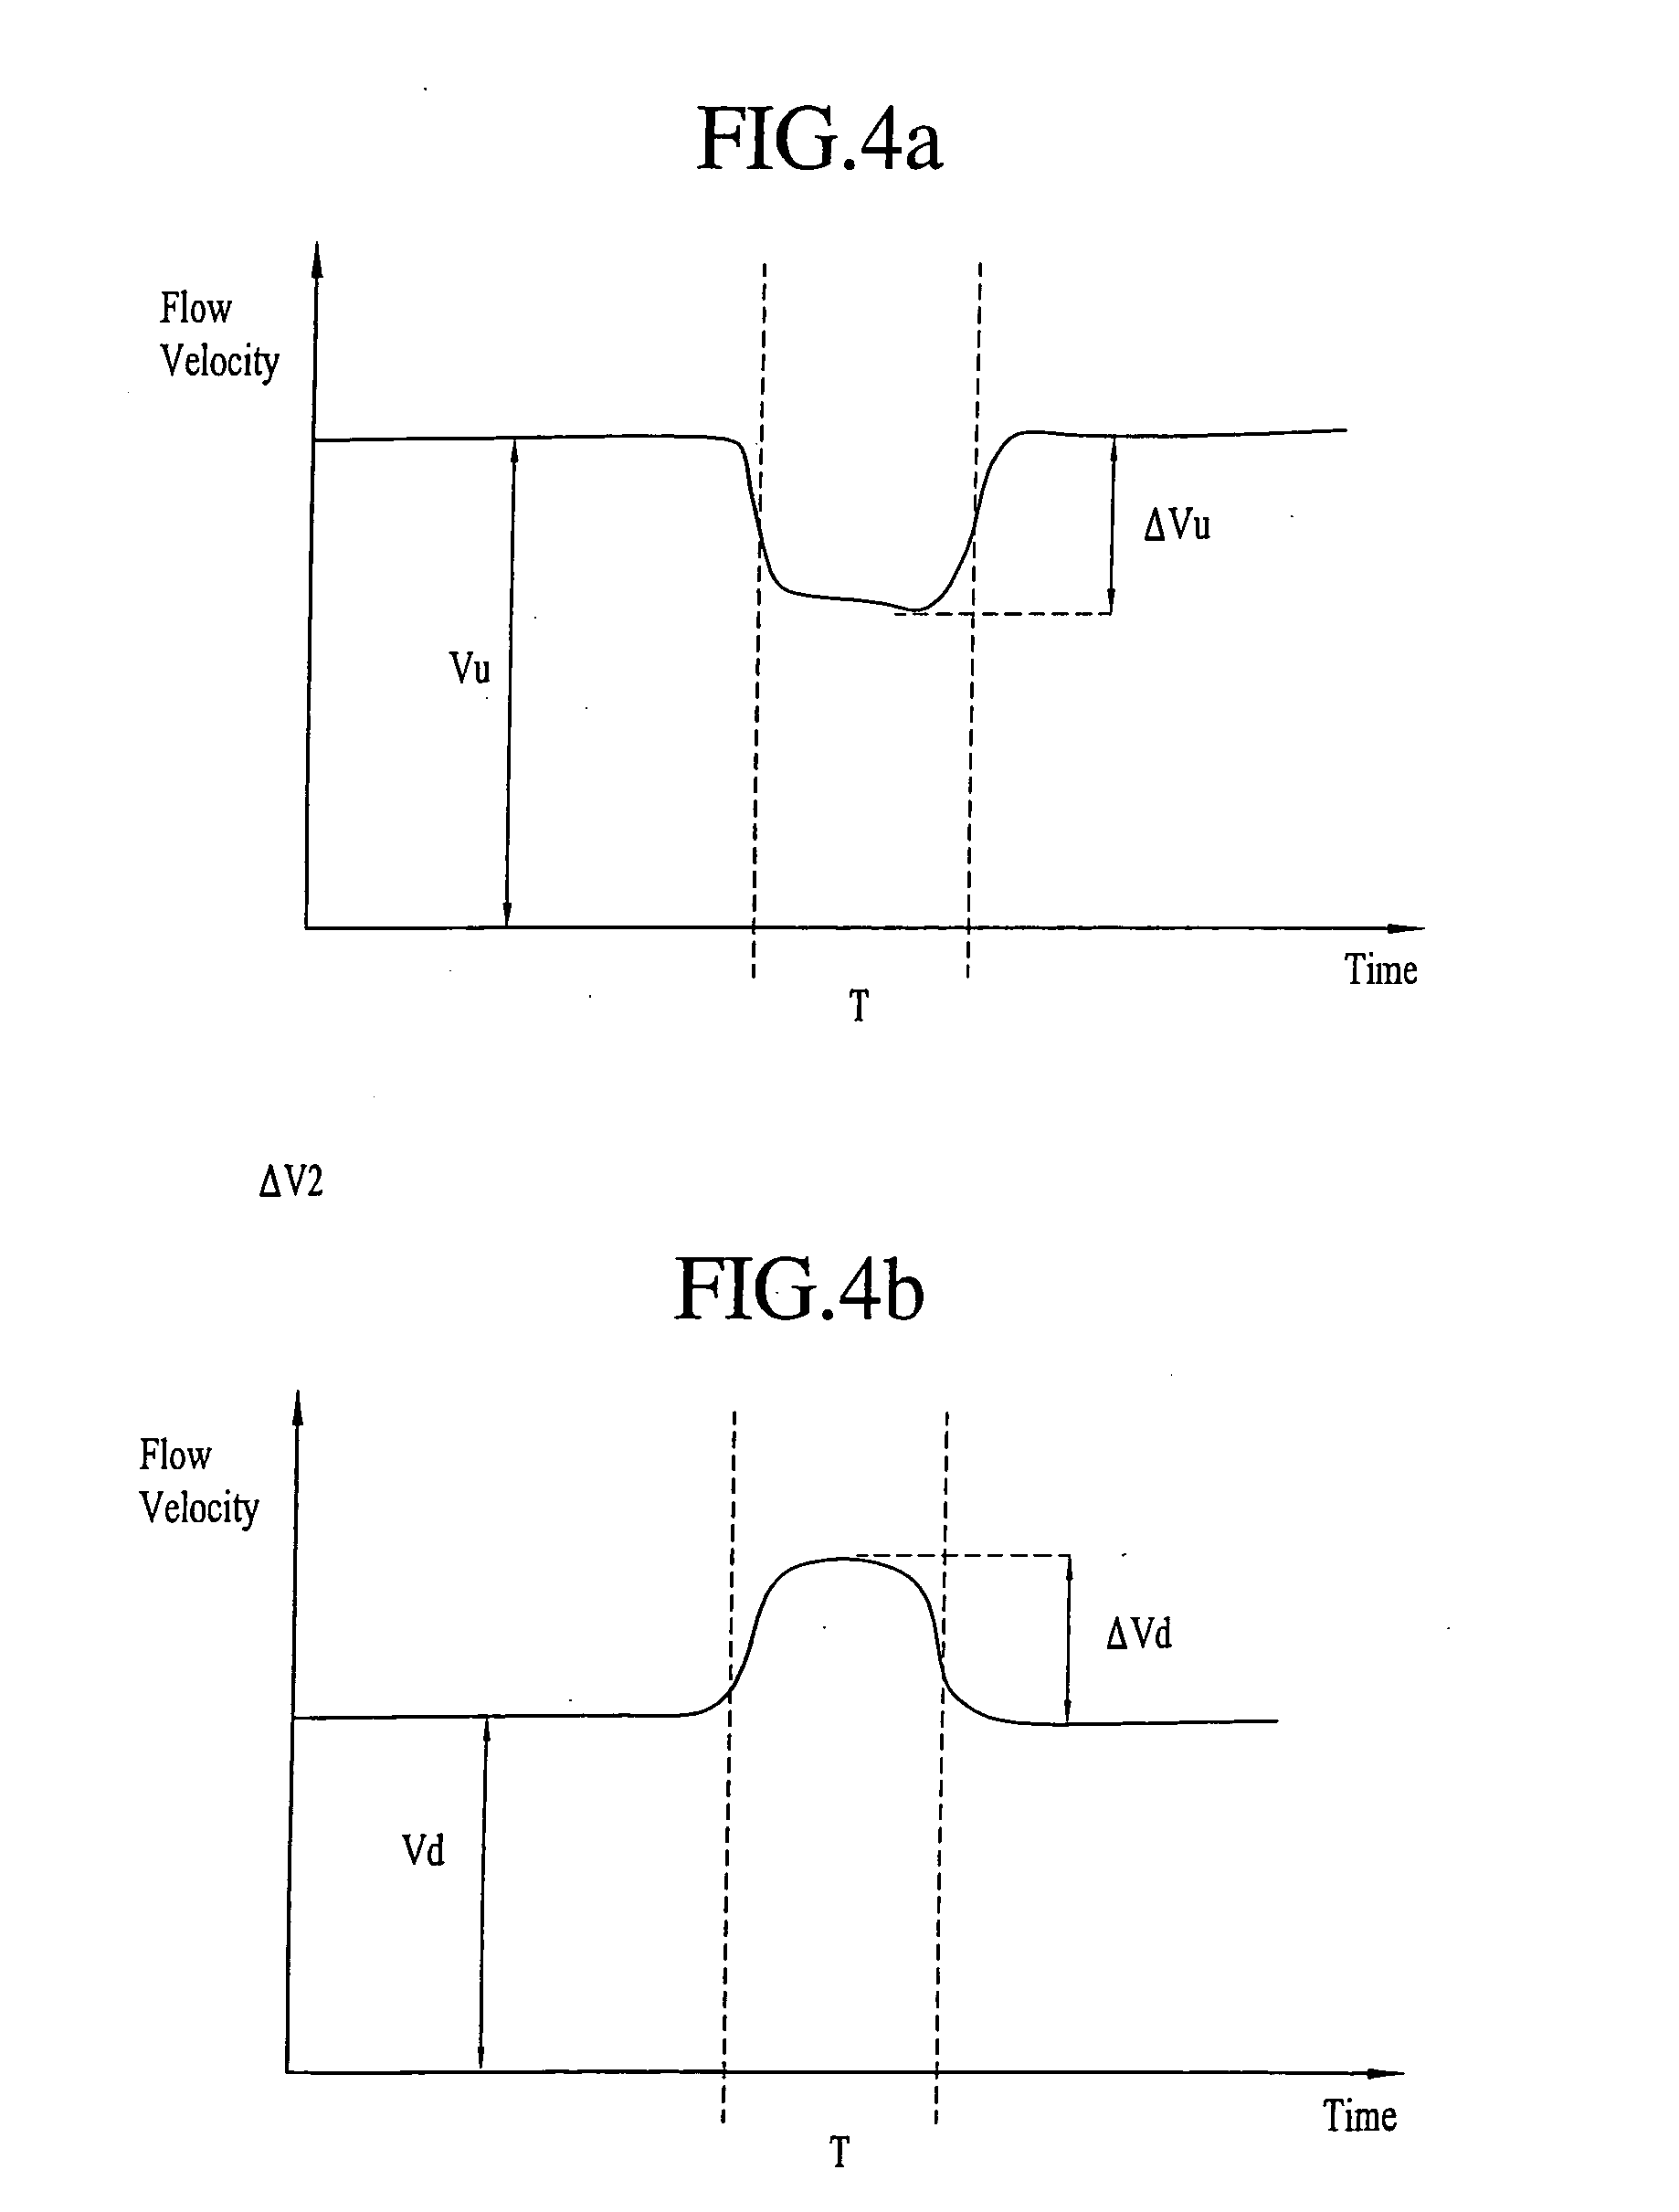 Method and apparatus to determine an initial flow rate in a conduit